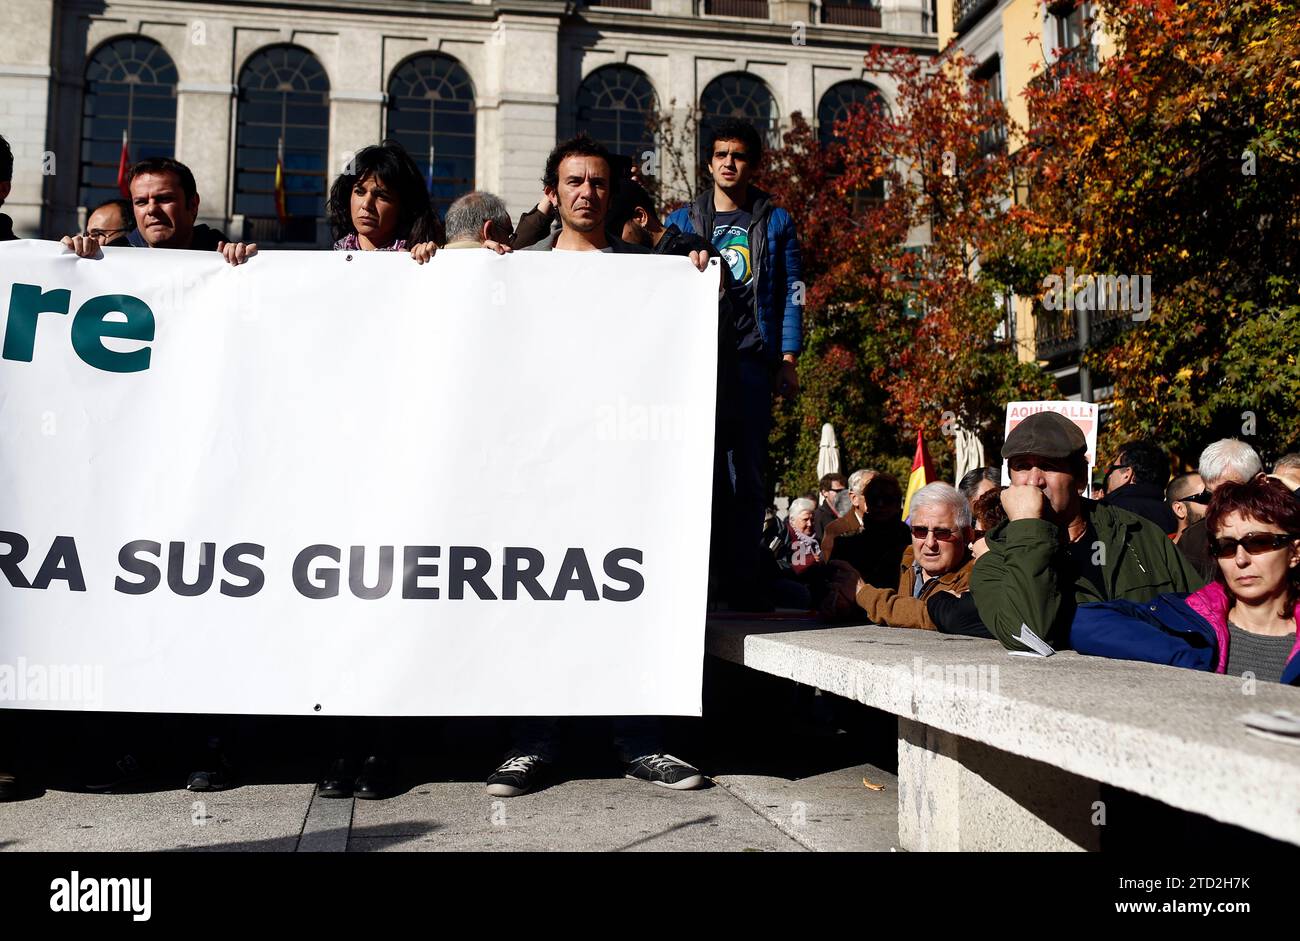 Madrid, 11/28/2015. Demonstration against the war, among the attendees were the actor Alberto San Juan, the leader of Podemos in Andalusia, Teresa Rodríguez and the mayor of Cádiz 'Kichi', and Mauricio Valiente participated on behalf of Ahora Madrid. Photo: Oscar del Pozo ARCHDC. Credit: Album / Archivo ABC / Oscar del Pozo Stock Photo